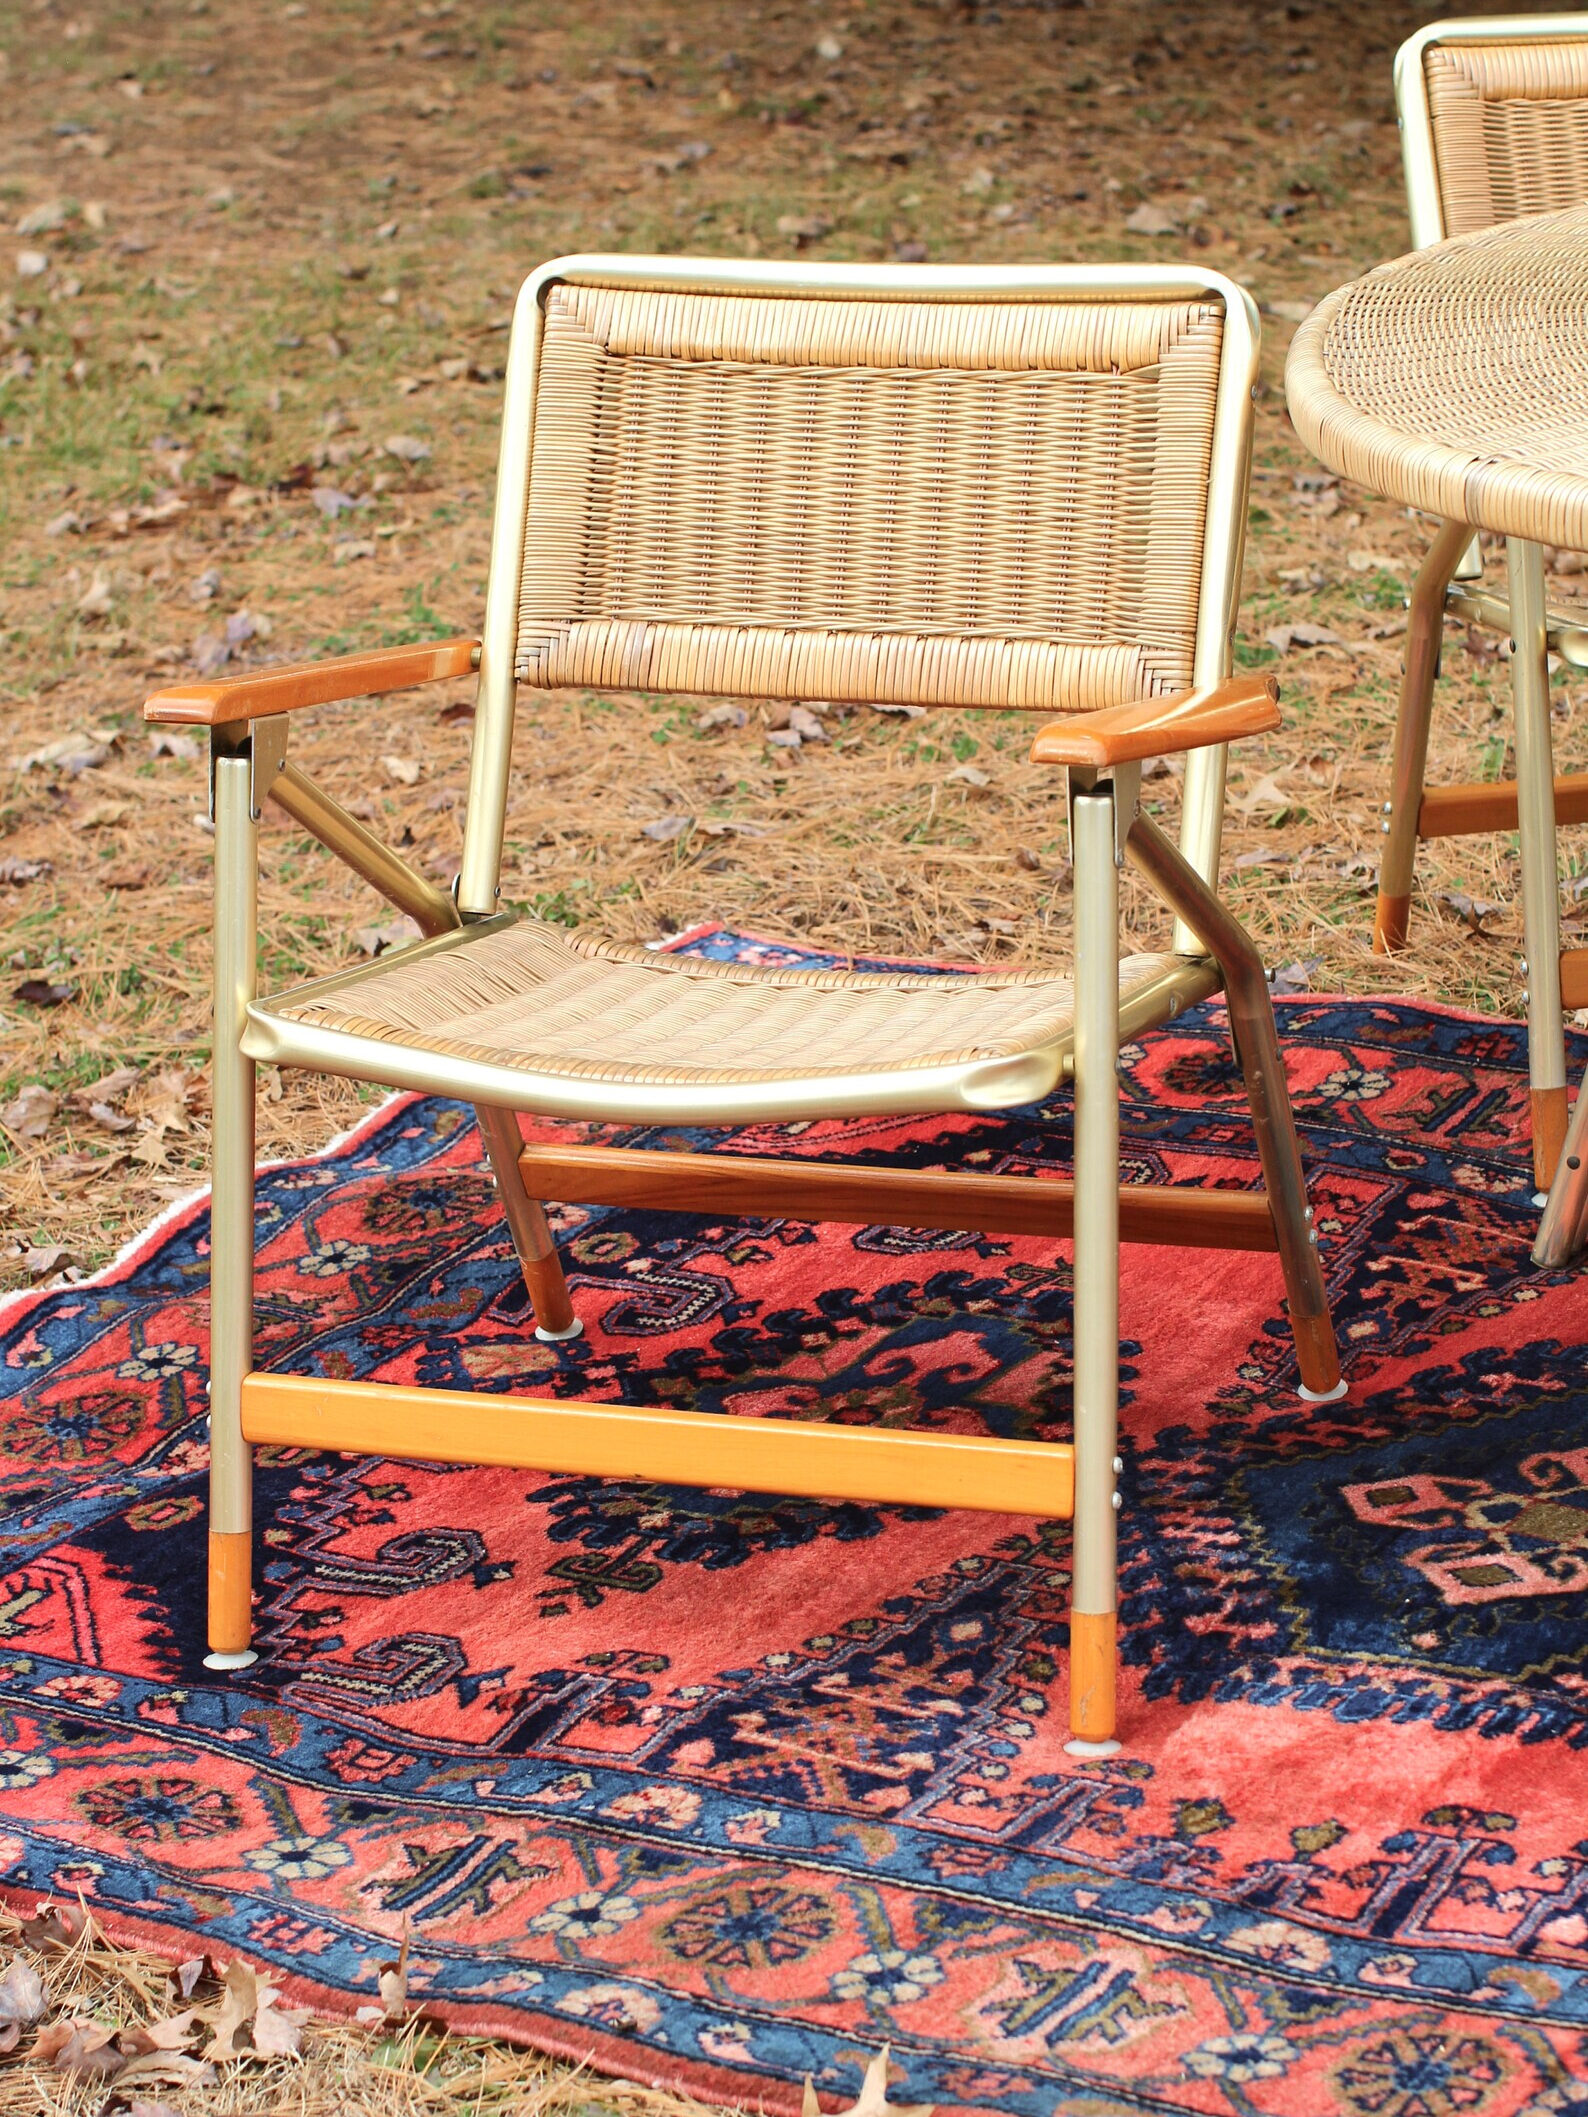 A table and chairs on a rug in the woods.